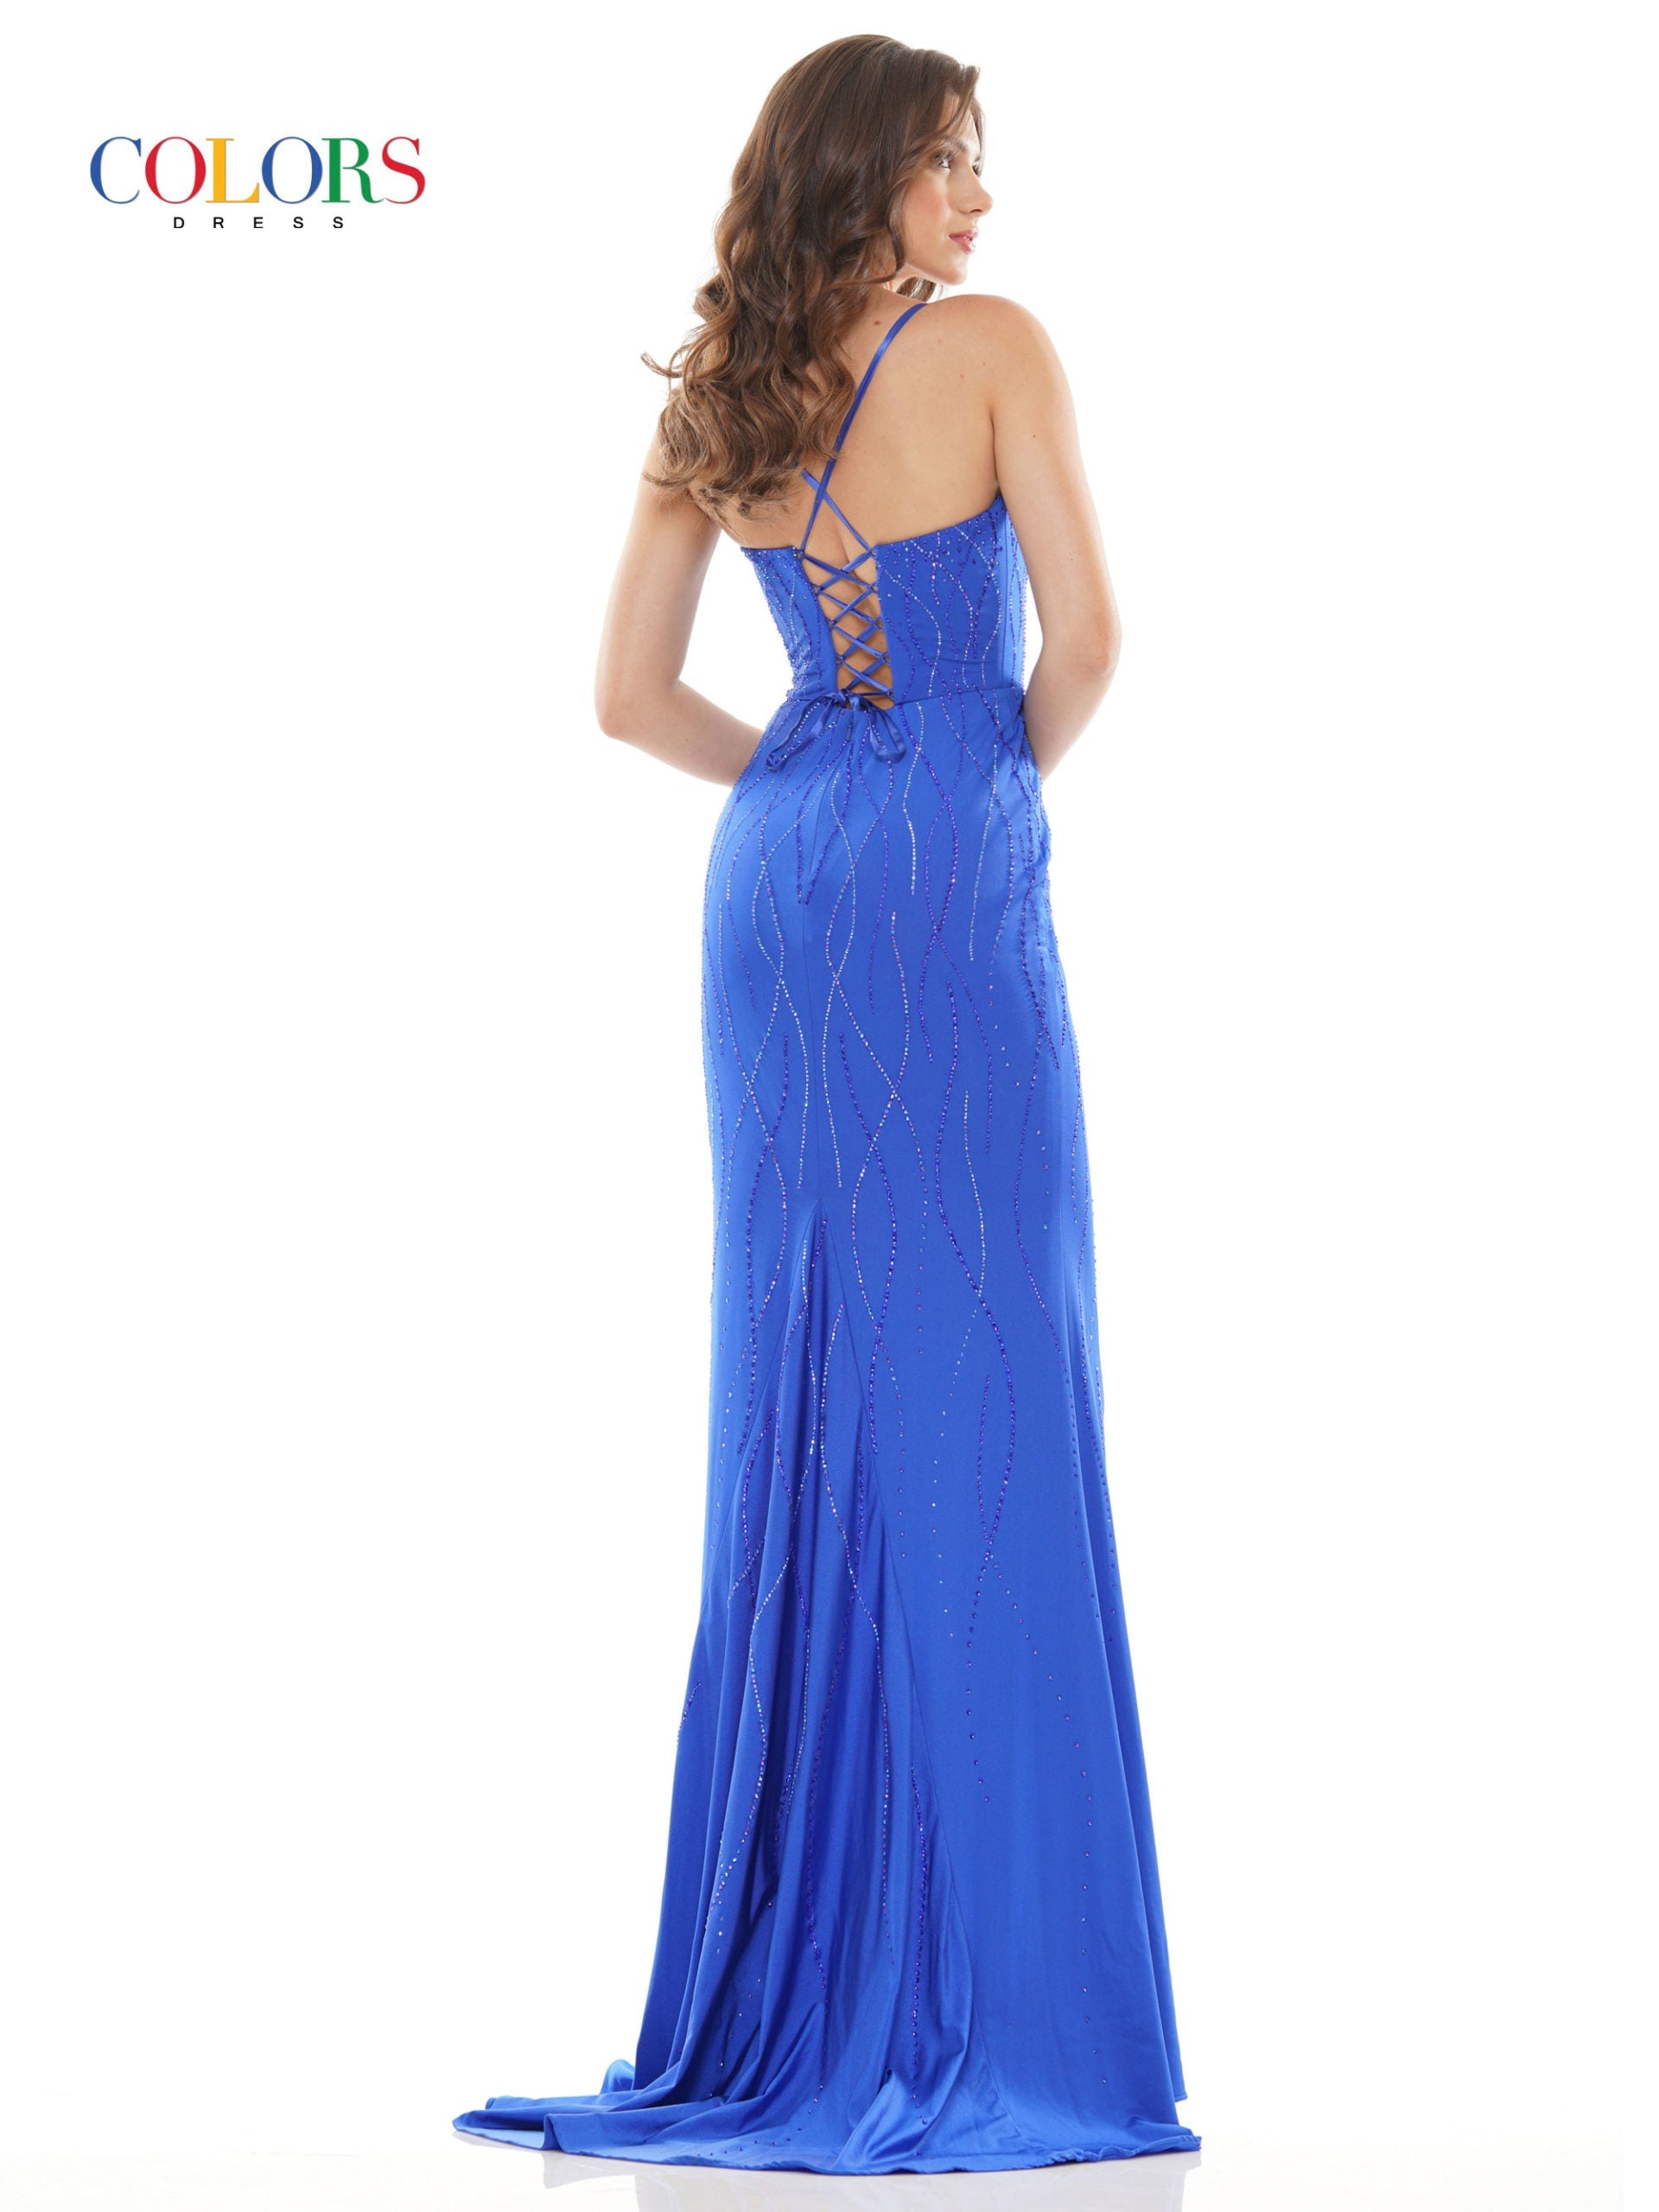 Colors G1052 Long Fitted Crystal Corset back formal Prom Dress Slit Pageant Gown 46″ satin lycra with heat-set stone fit and flare dress, curved square neck and lace-up back  Available Sizes: 2-24  Available Colors: Black, Red, Royal, Deep Green, Hot Pink, Tangerine, Ultra Violet